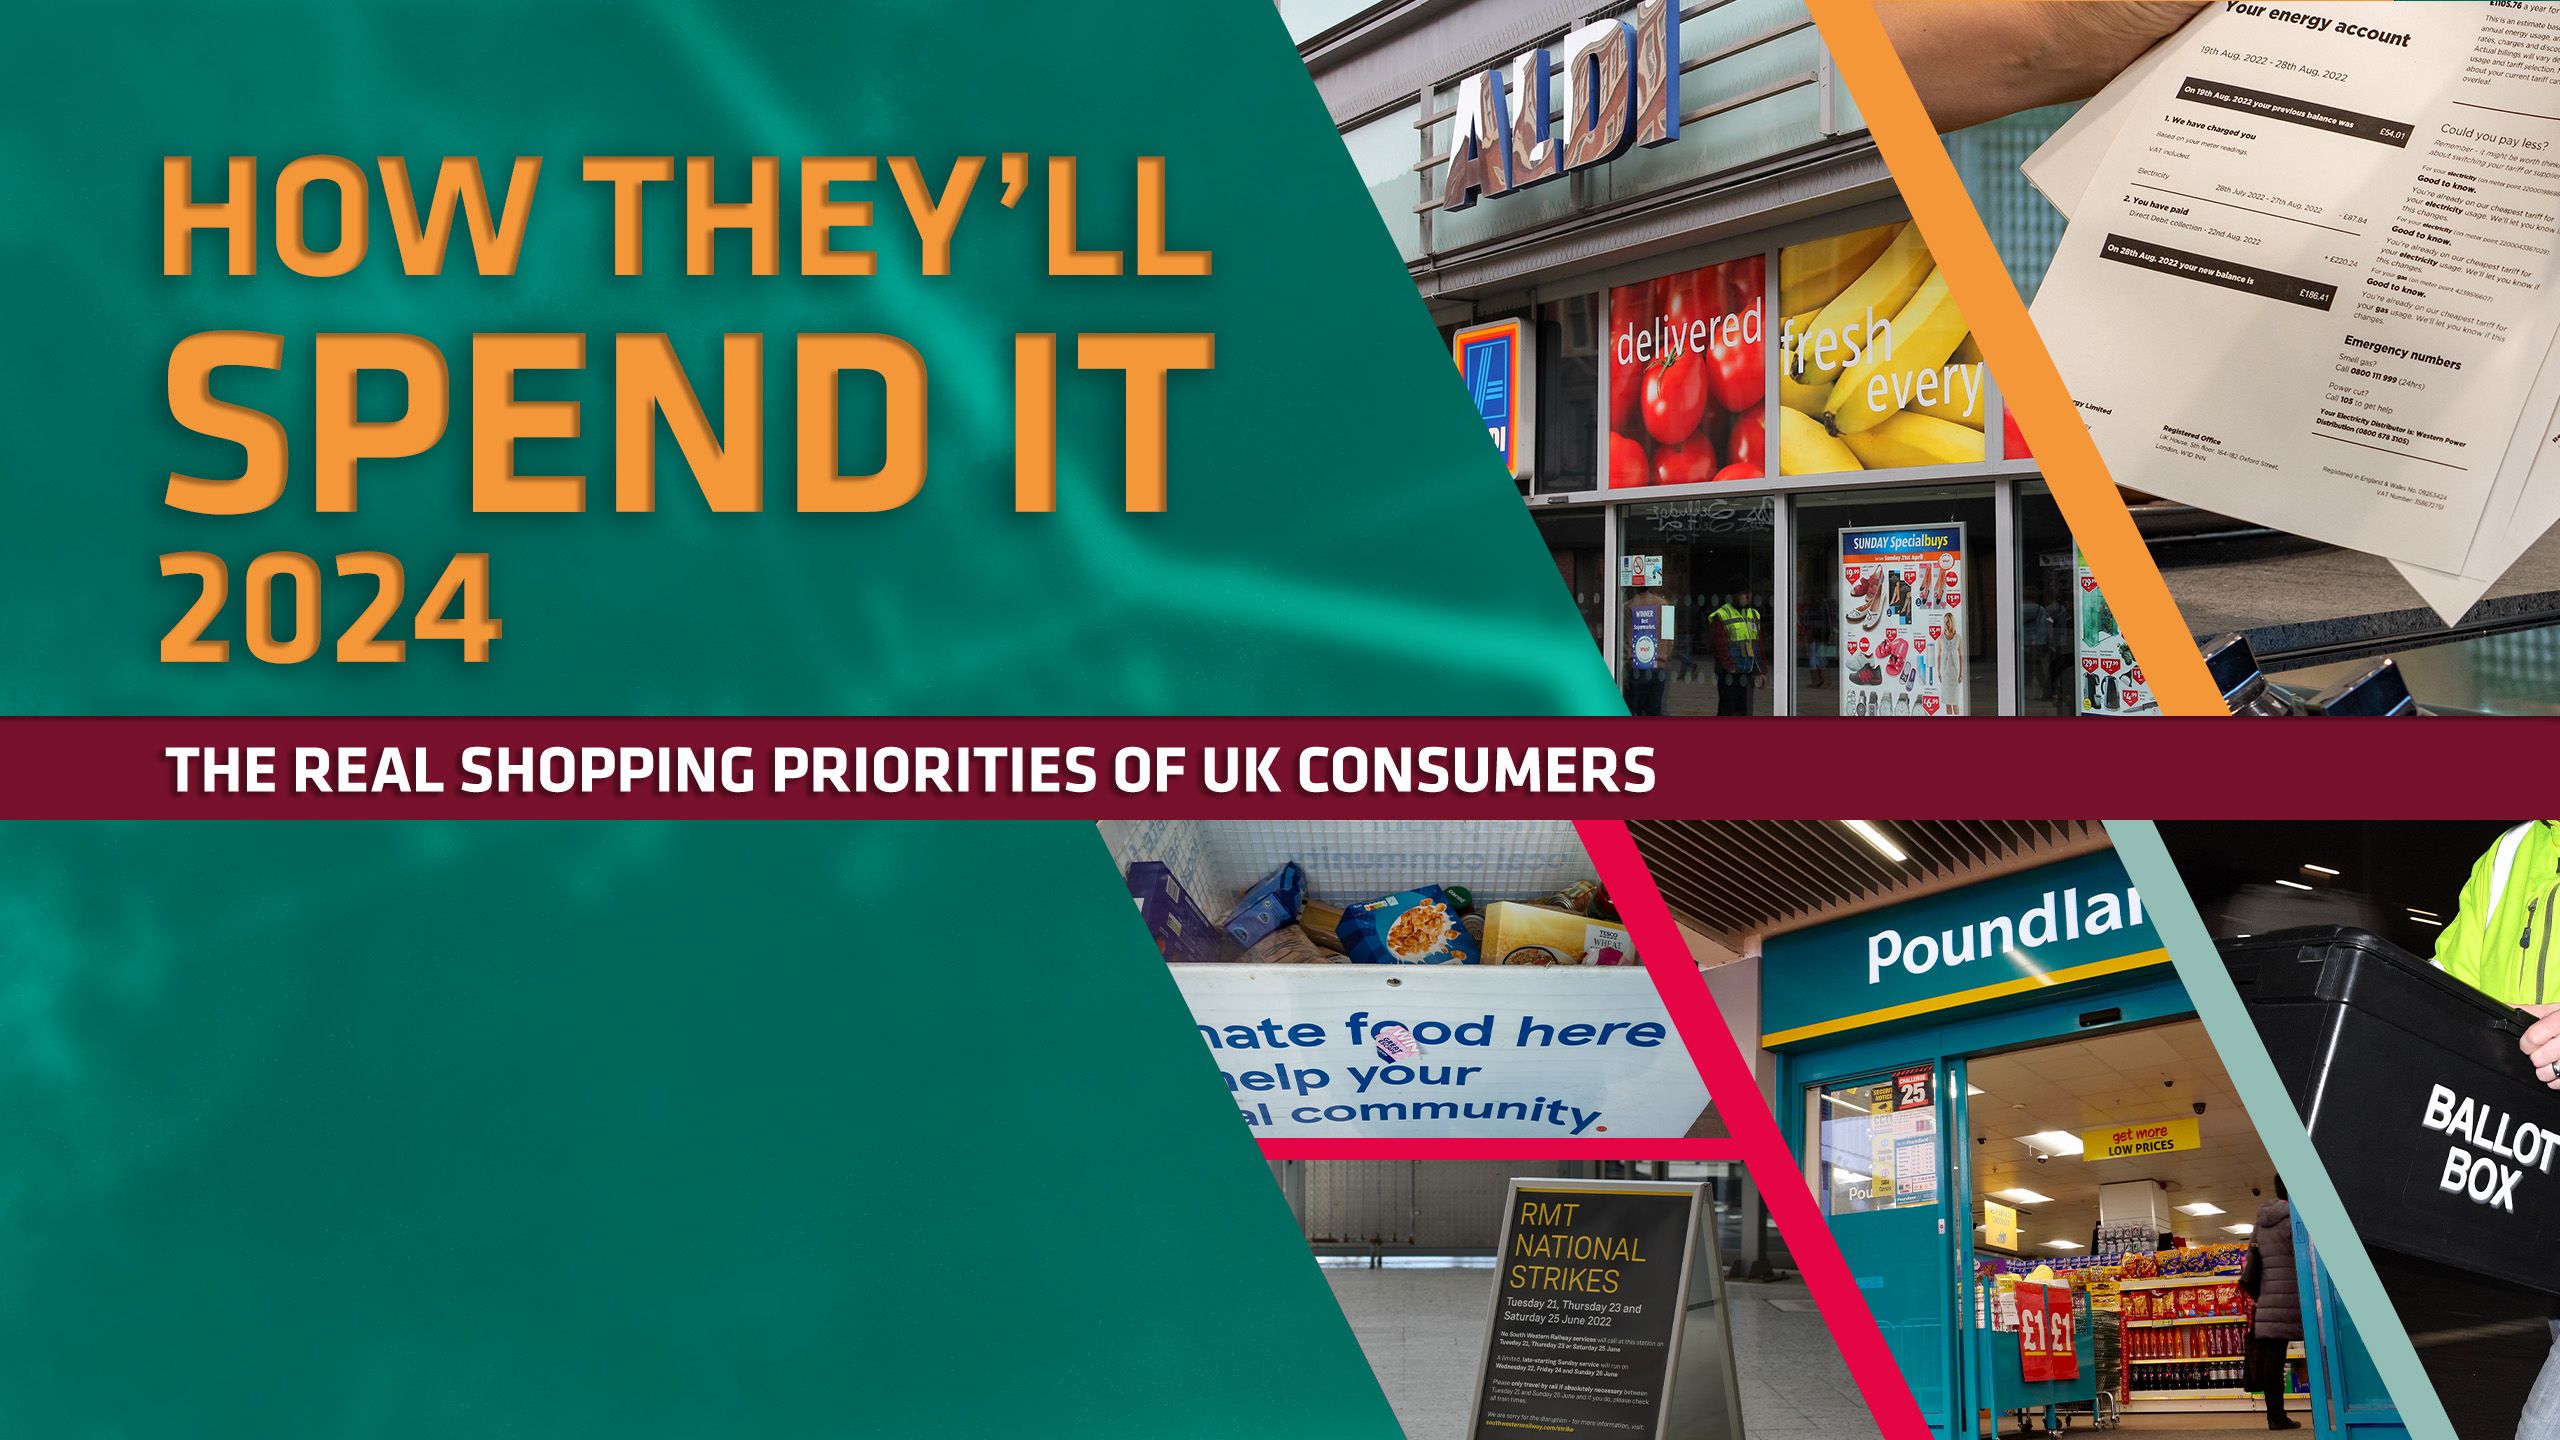 How They'll Spend it 2024: The real shopping priorities of UK consumers